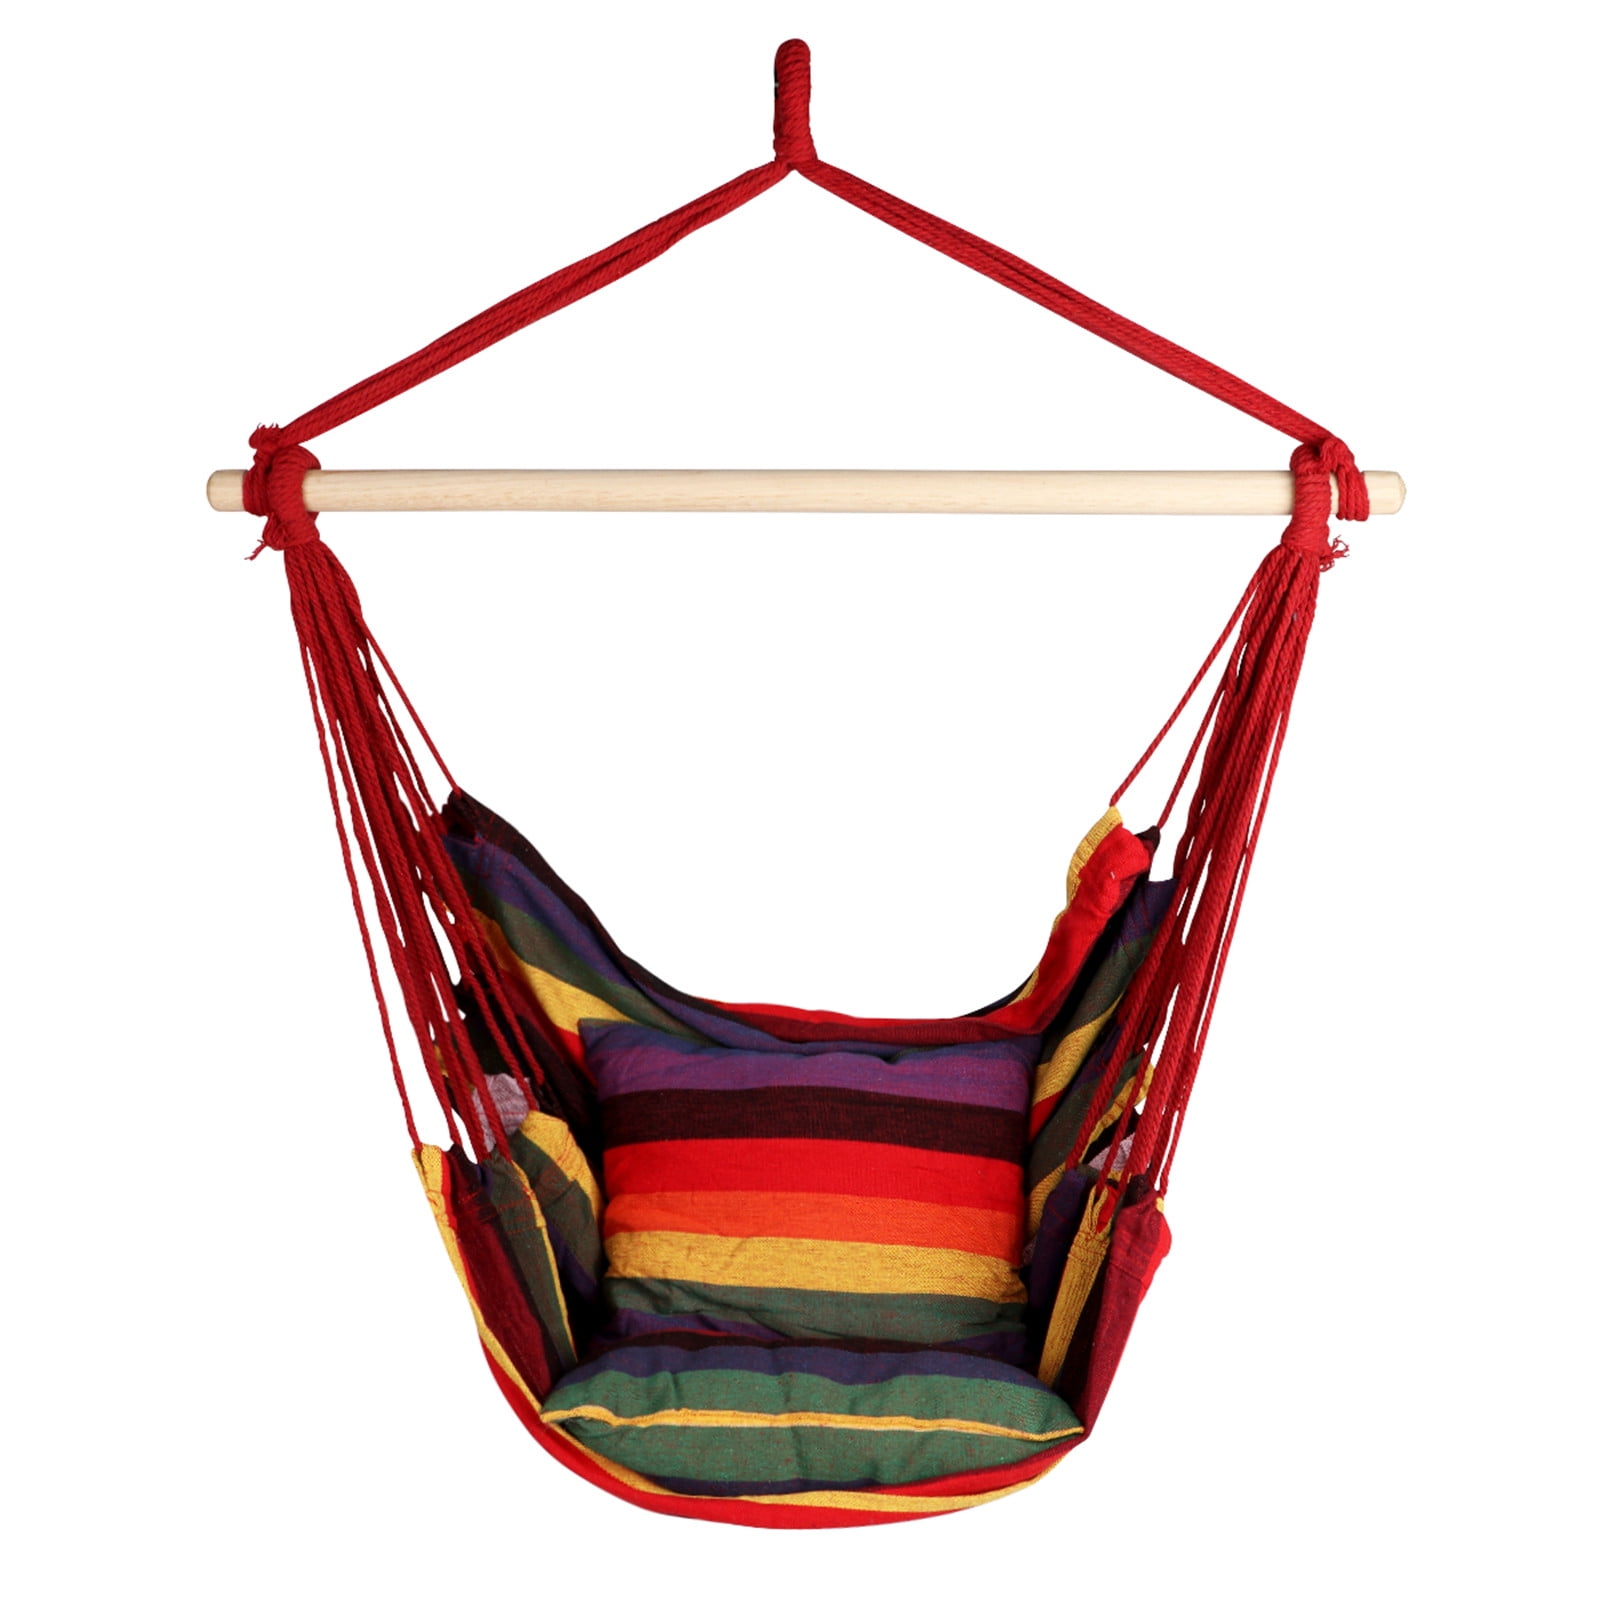 JOO LIFE Hanging Rope Hammock Chair Rainbow Hanging Swing Chair for Indoor and Outdoor- 2 Seat Cushions Included Max.265 LBs 